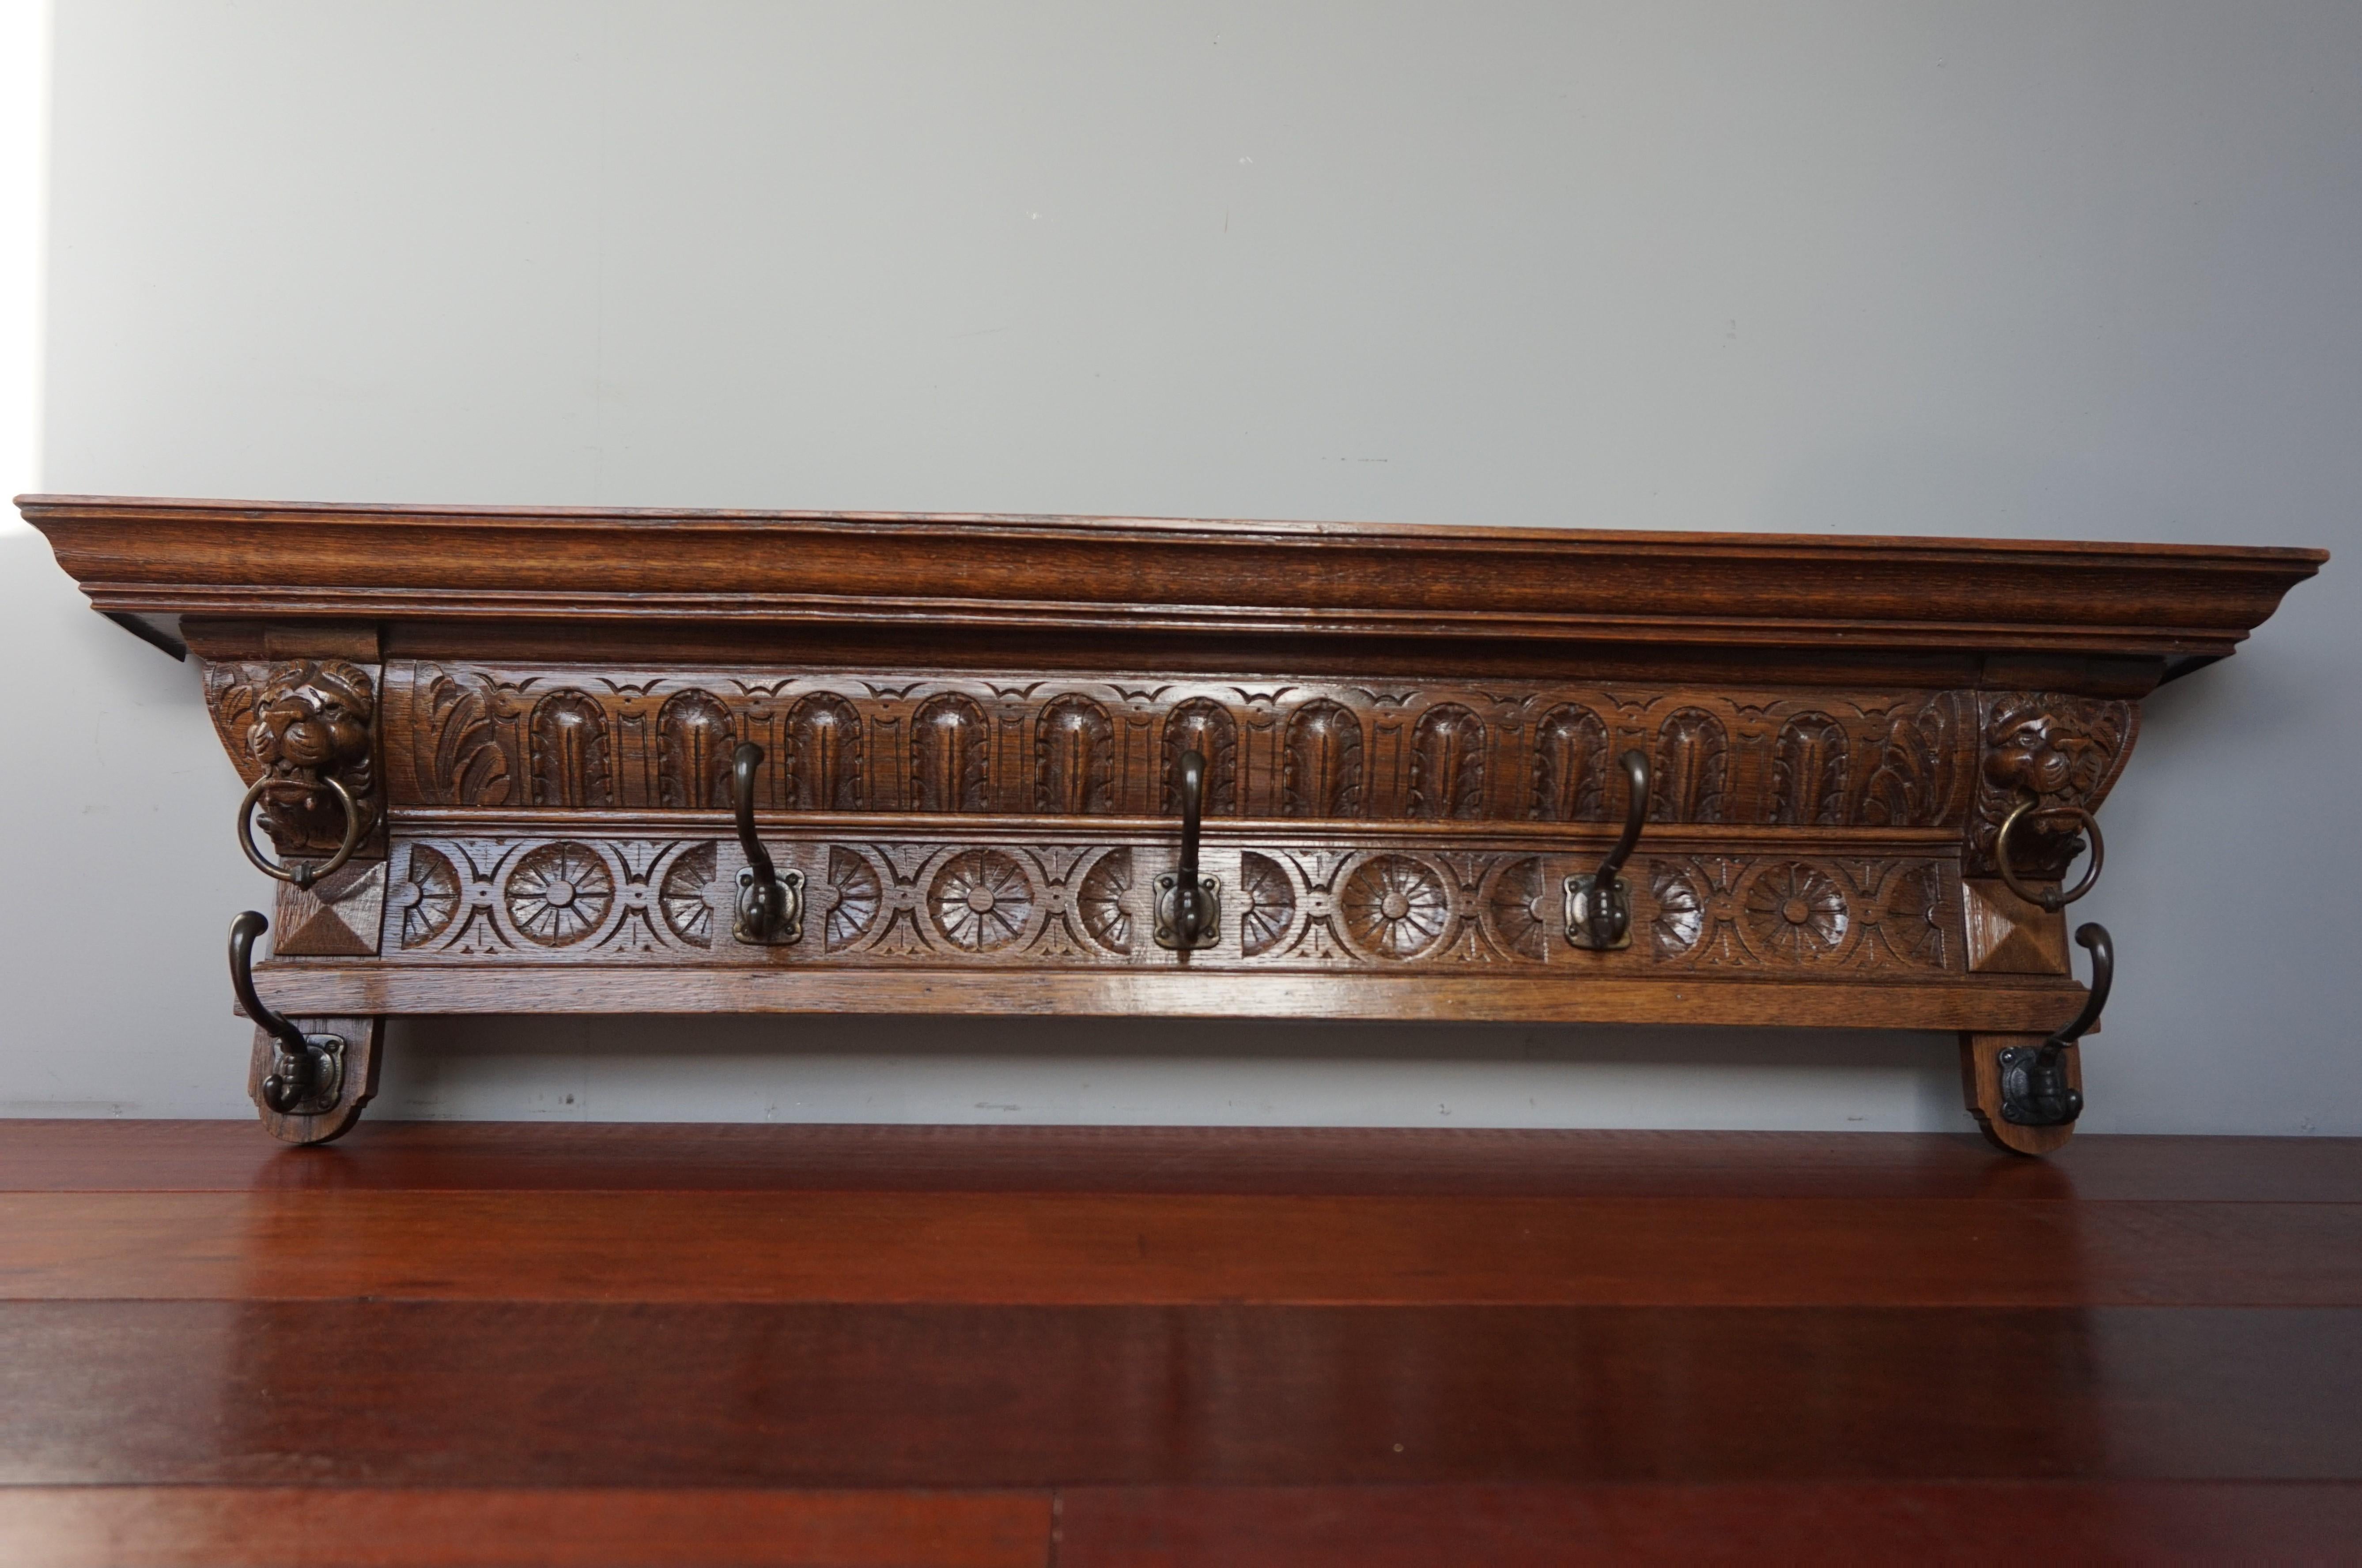 Early 1900s sculptural oak wall coat rack.

This striking antique Dutch coat rack is special, practical and highly decorative. It is special, because of the quality of the Renaissance carvings and its excellent condition. It is very practical,